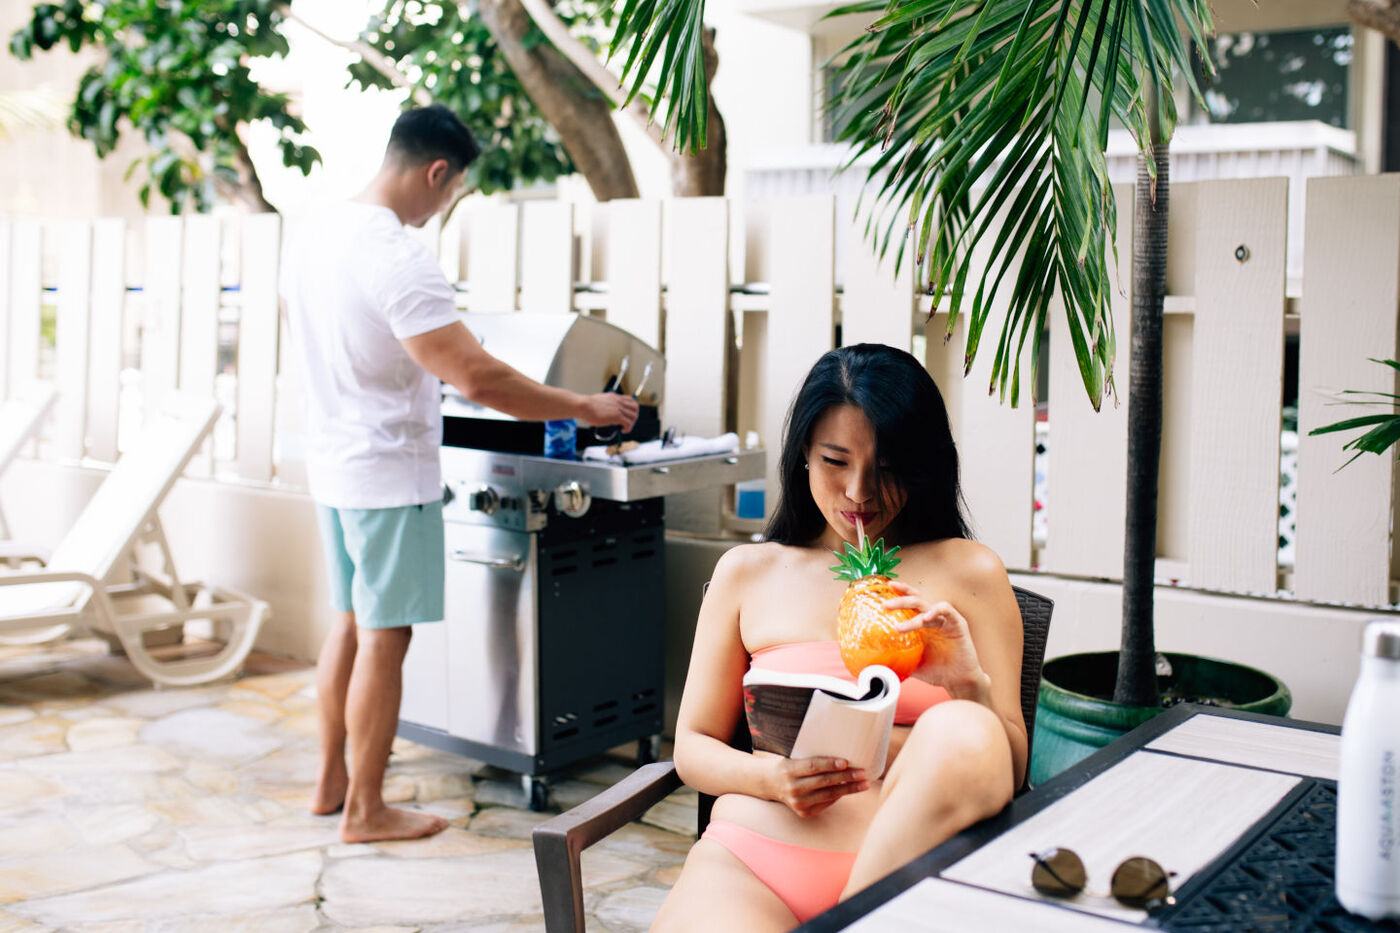 Man and woman enjoying outdoor barbecue grill and seating area near the pool